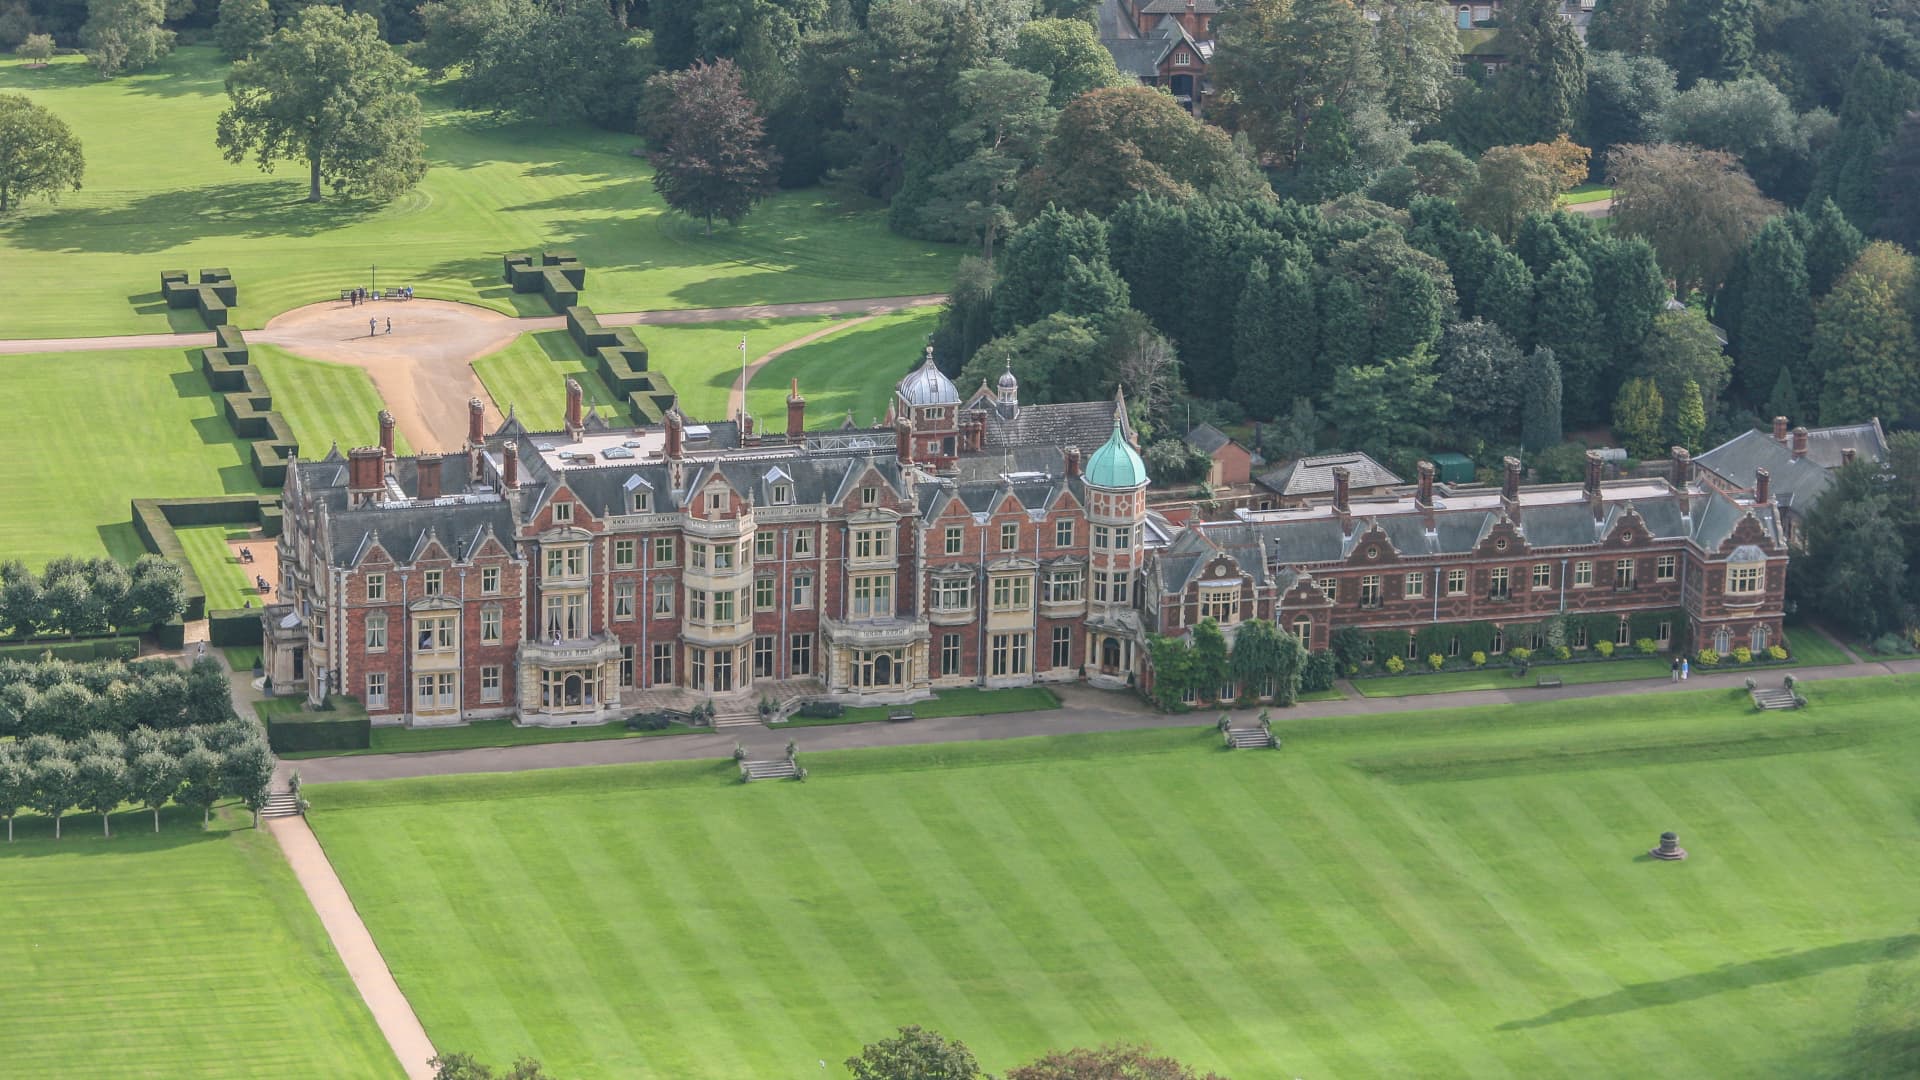 Sandringham House is one of the royal residencies Queen Elizabeth II privately owned.